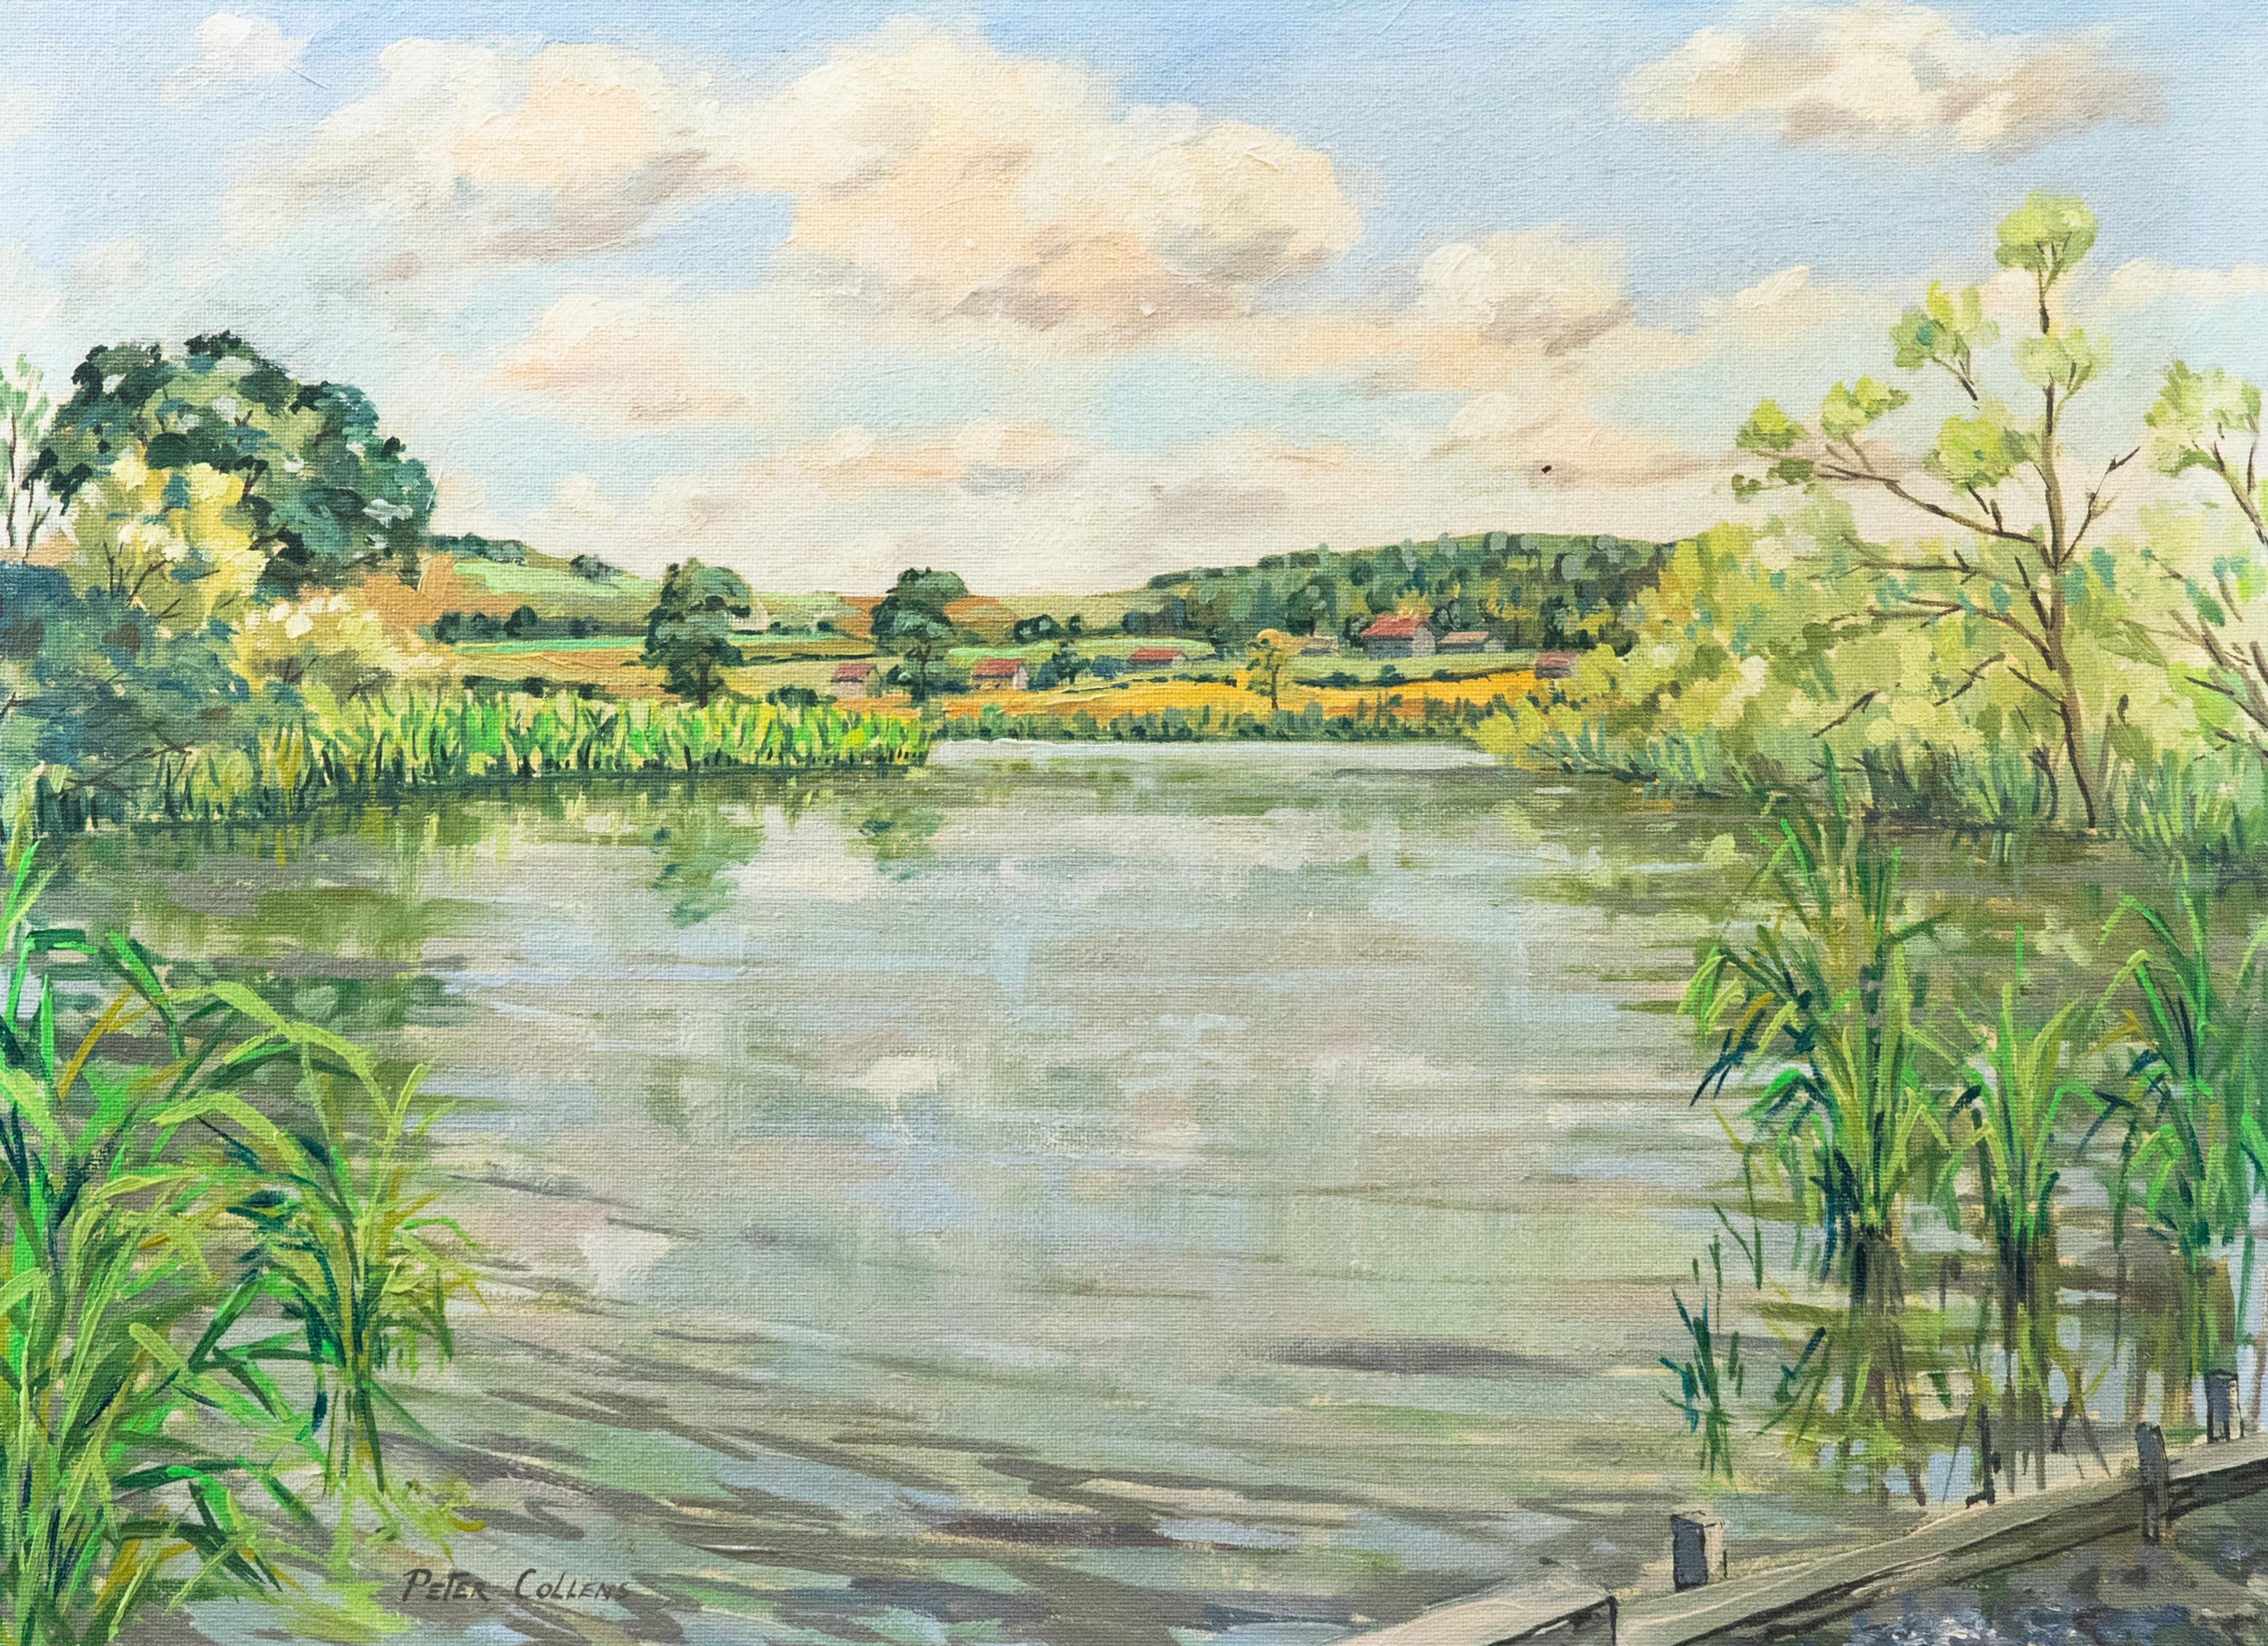 Unknown Landscape Painting - Peter Collens  - 1996 Oil, Patching Pond, Clapham